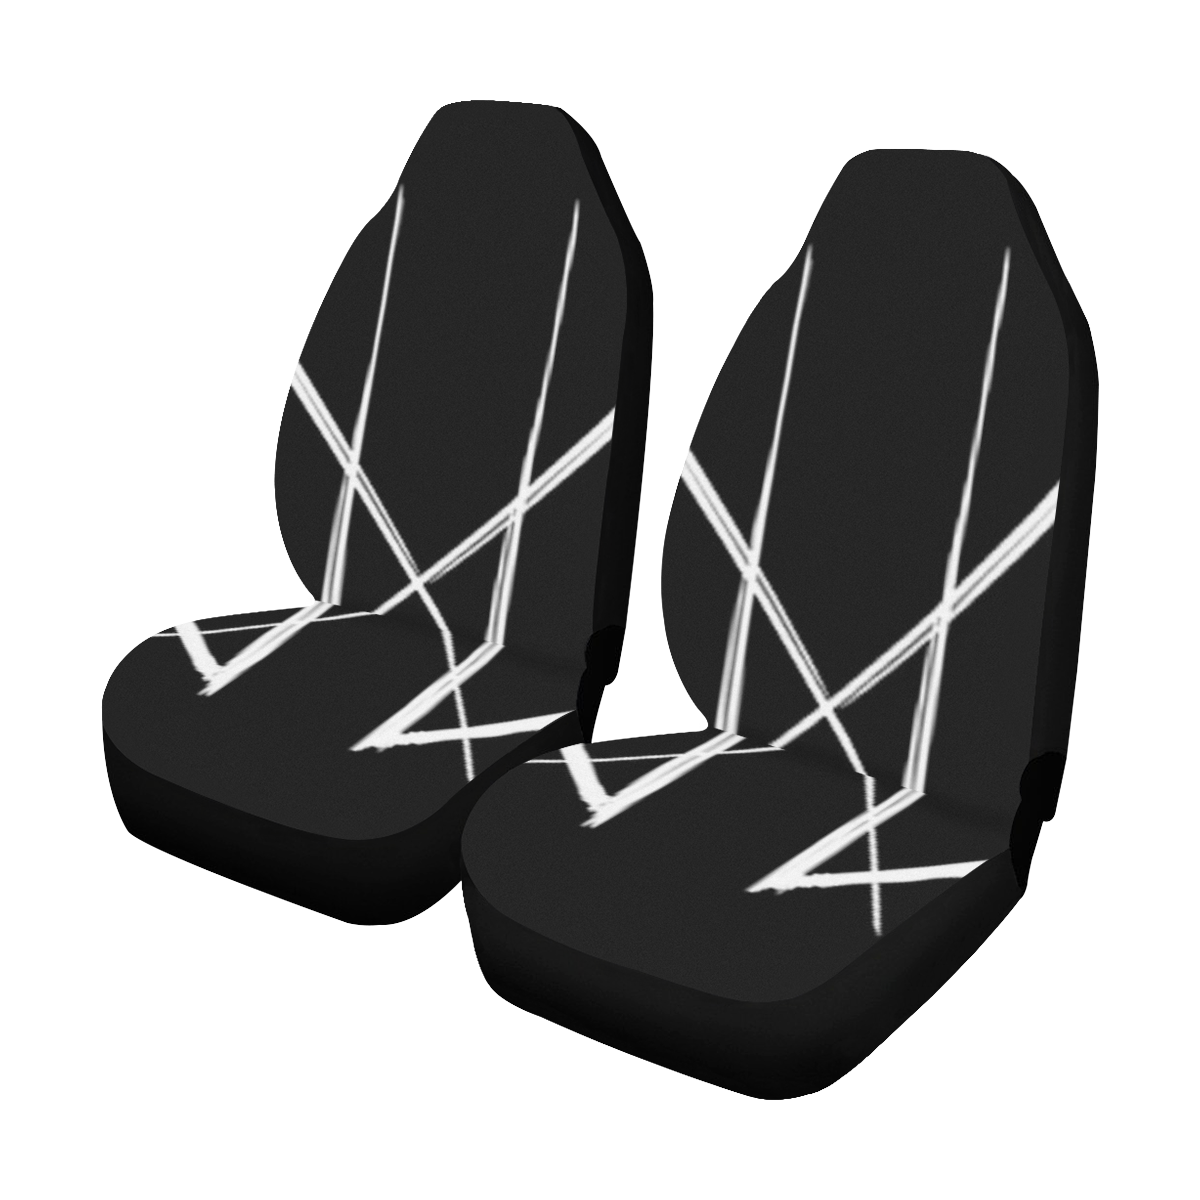 LYNZ Car Seat Covers (Set of 2)